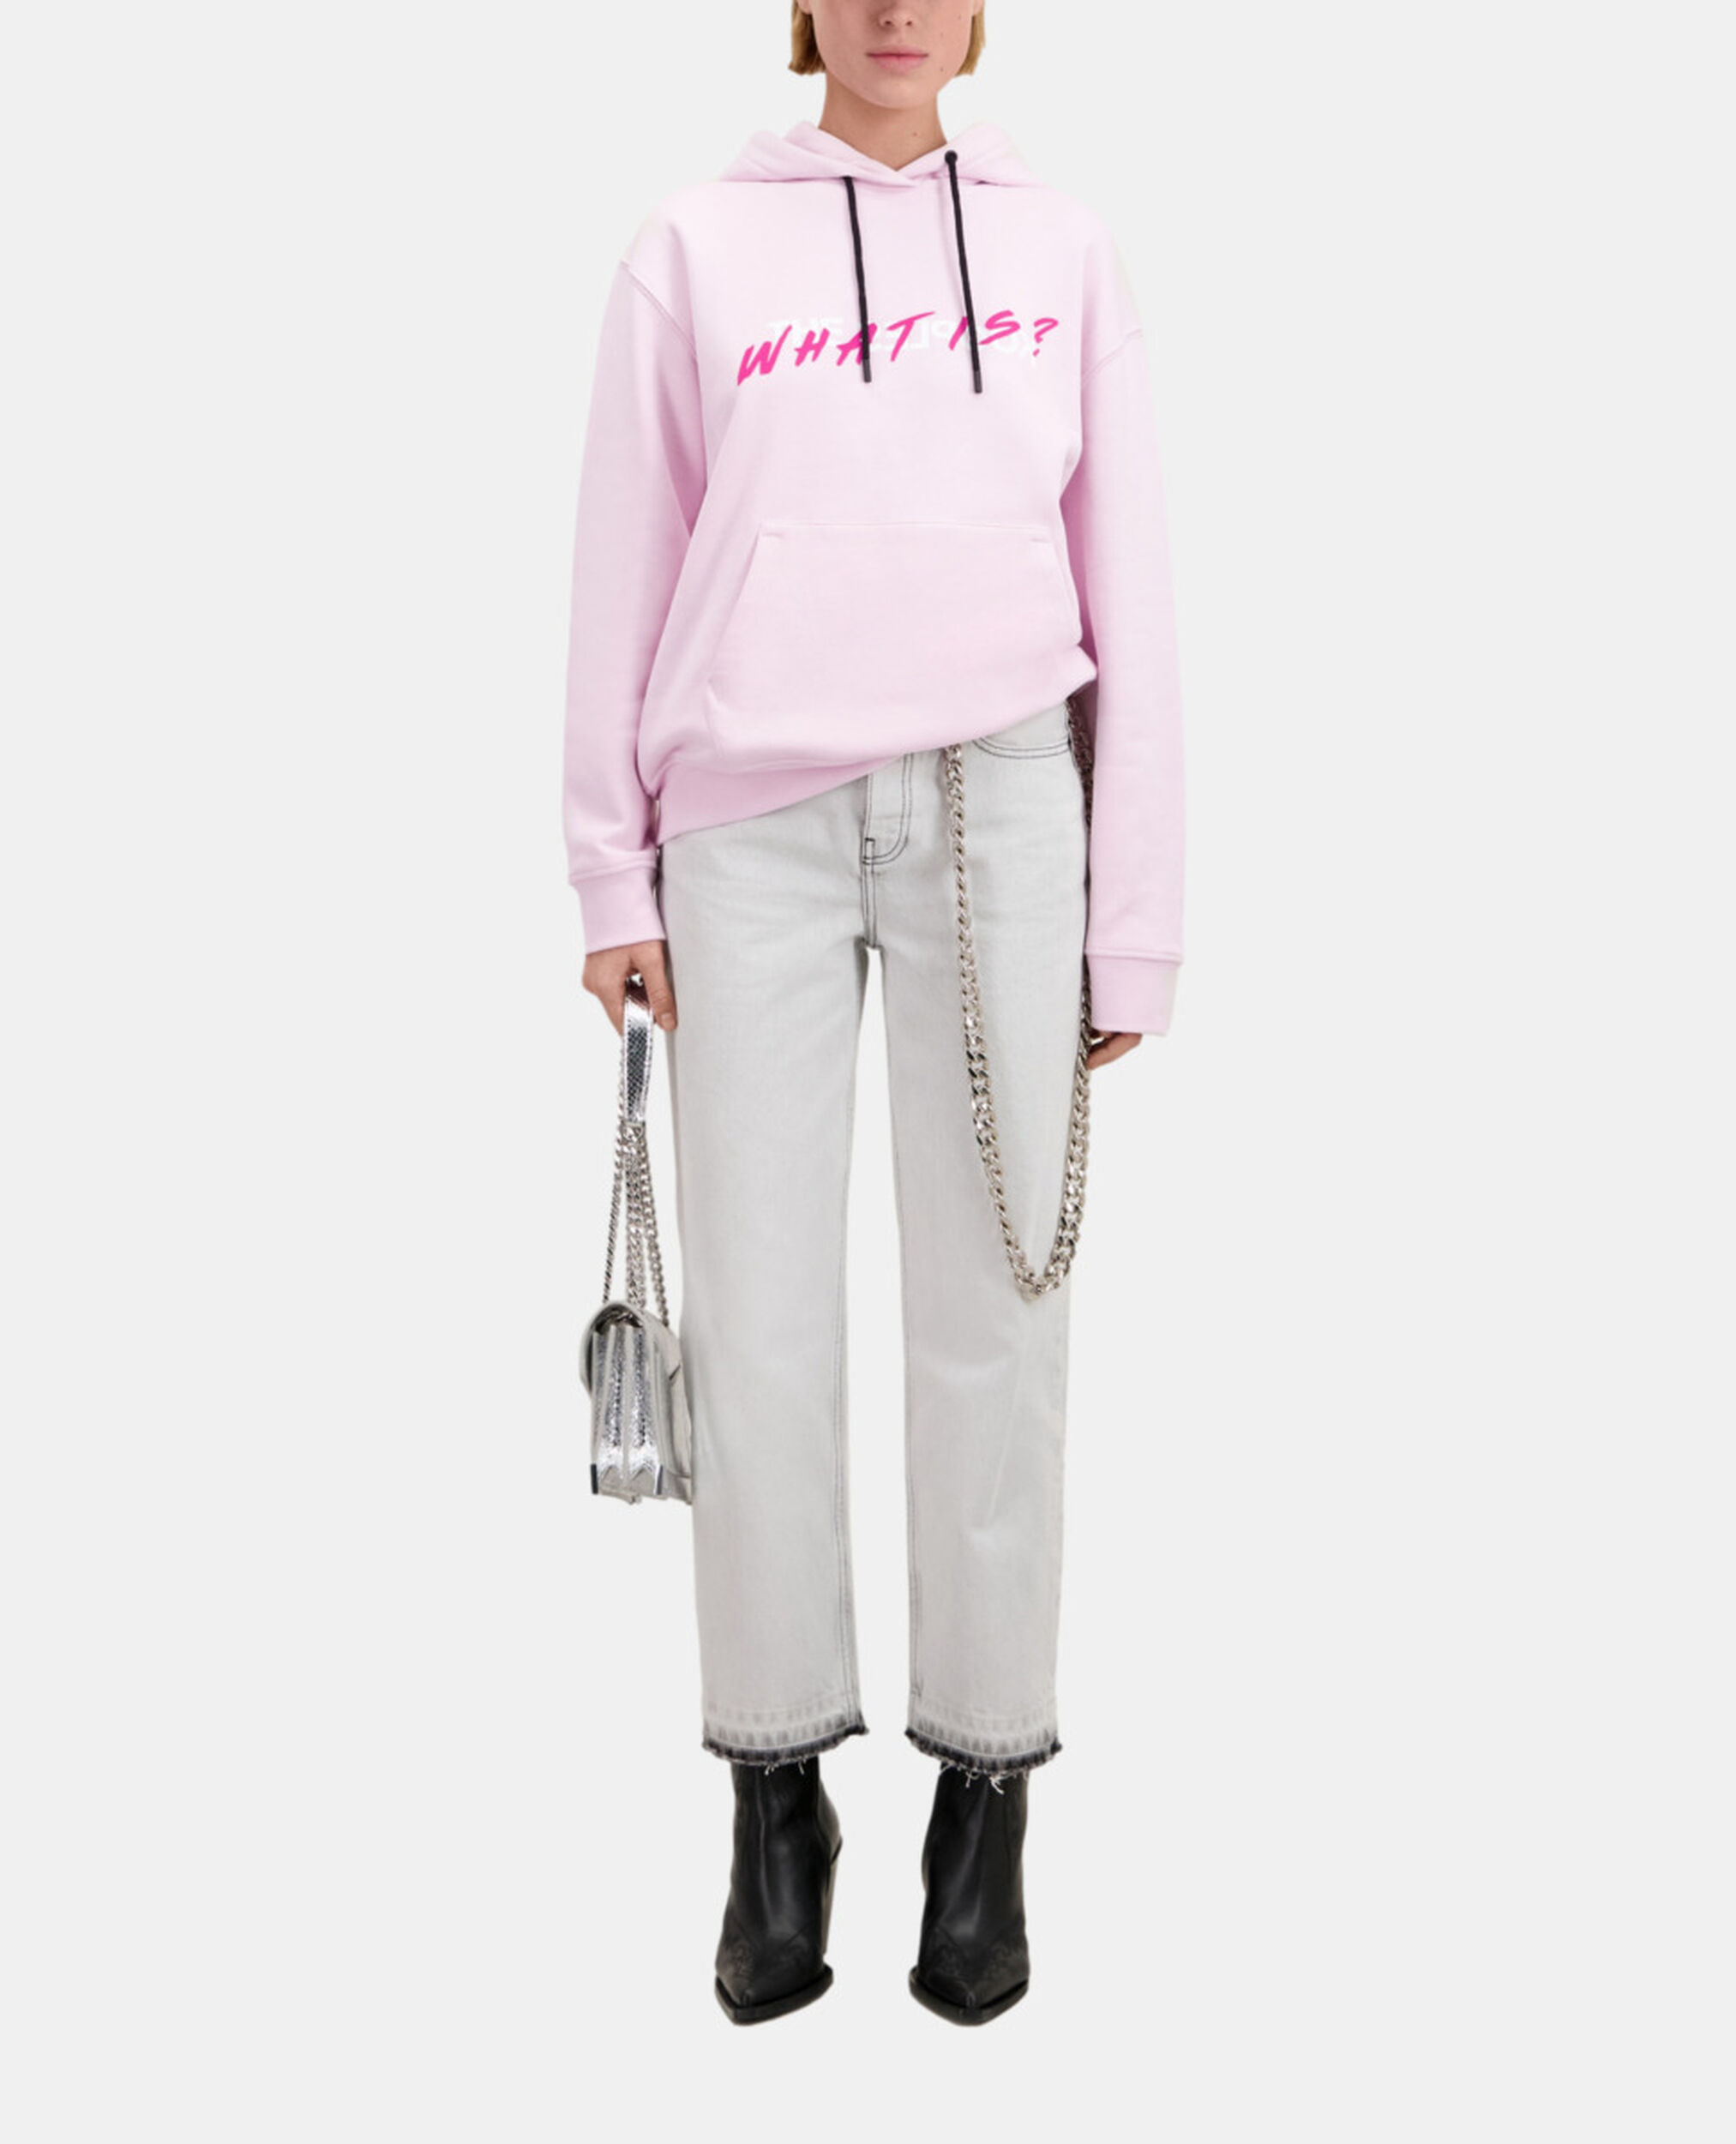 Sweatshirt à capuche What is rose, PALE PINK, hi-res image number null